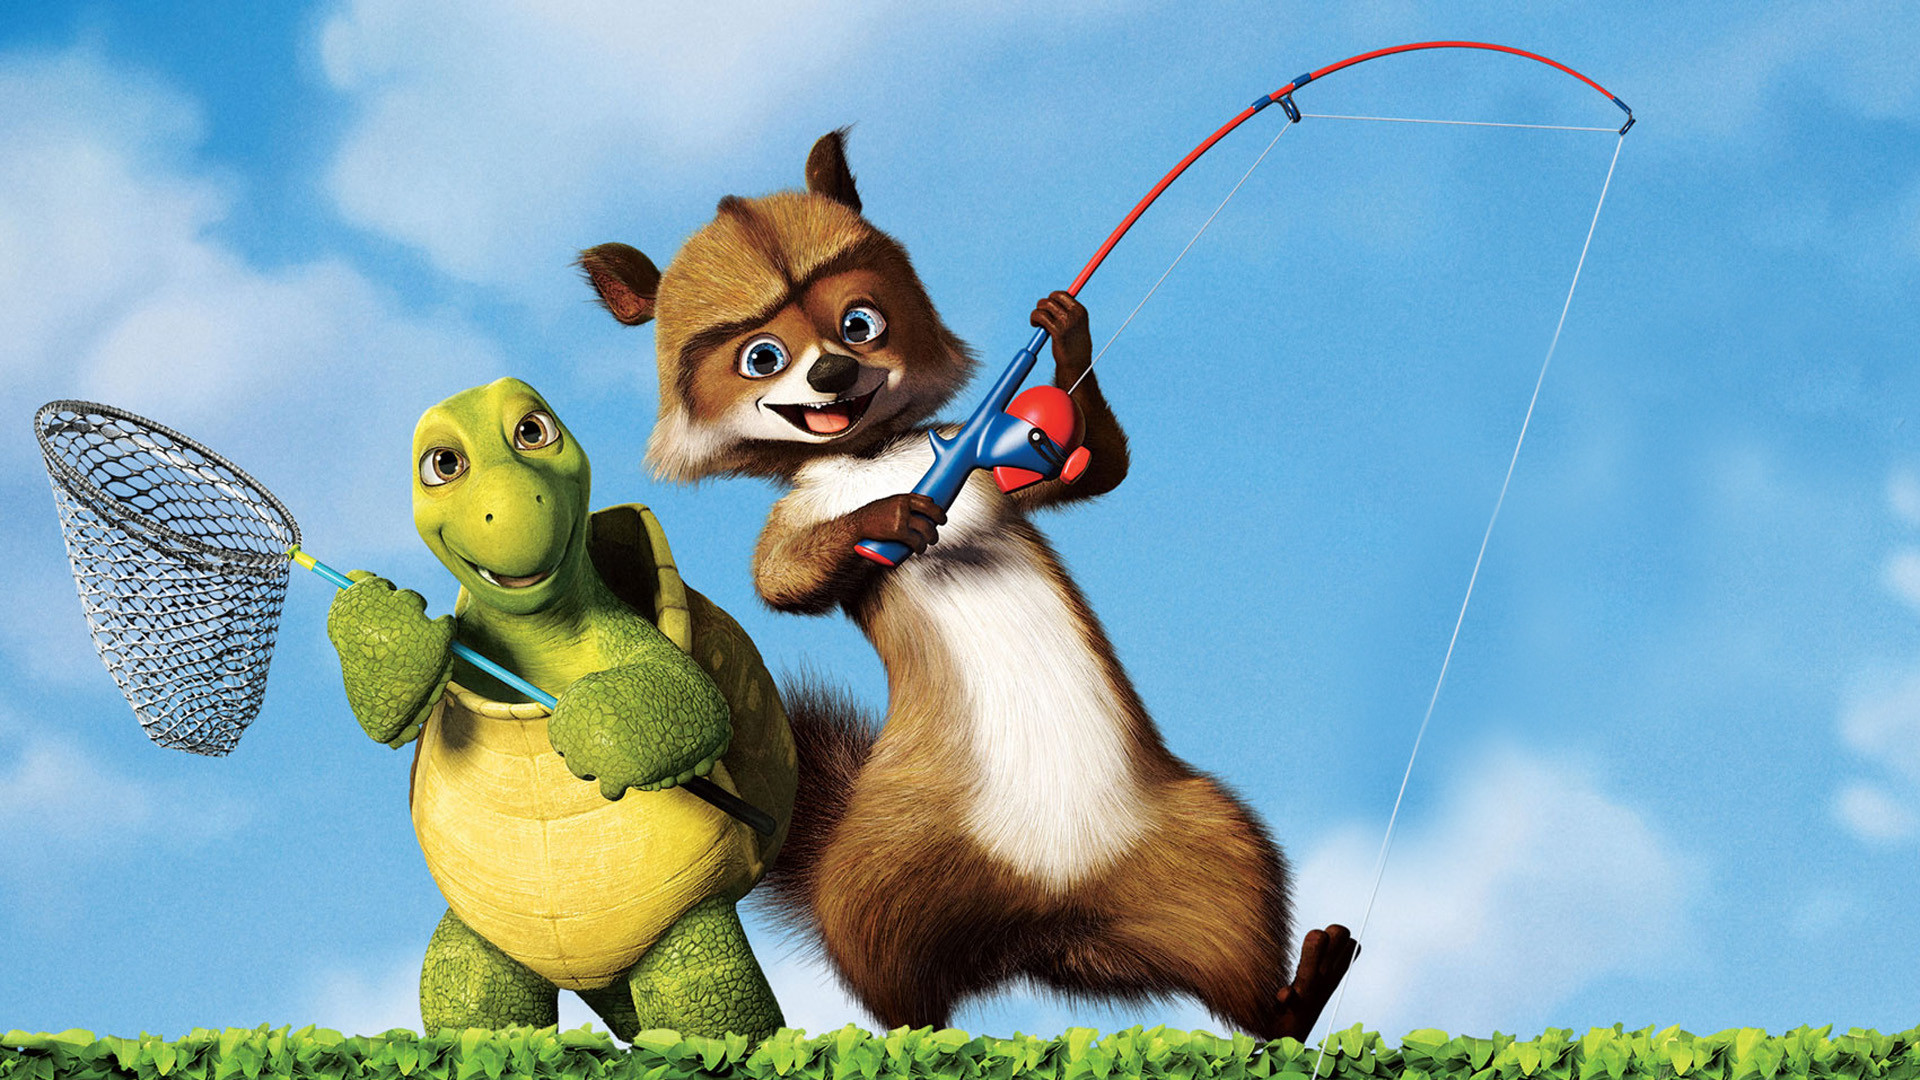 download wallpaper: over the hedge wallpaper